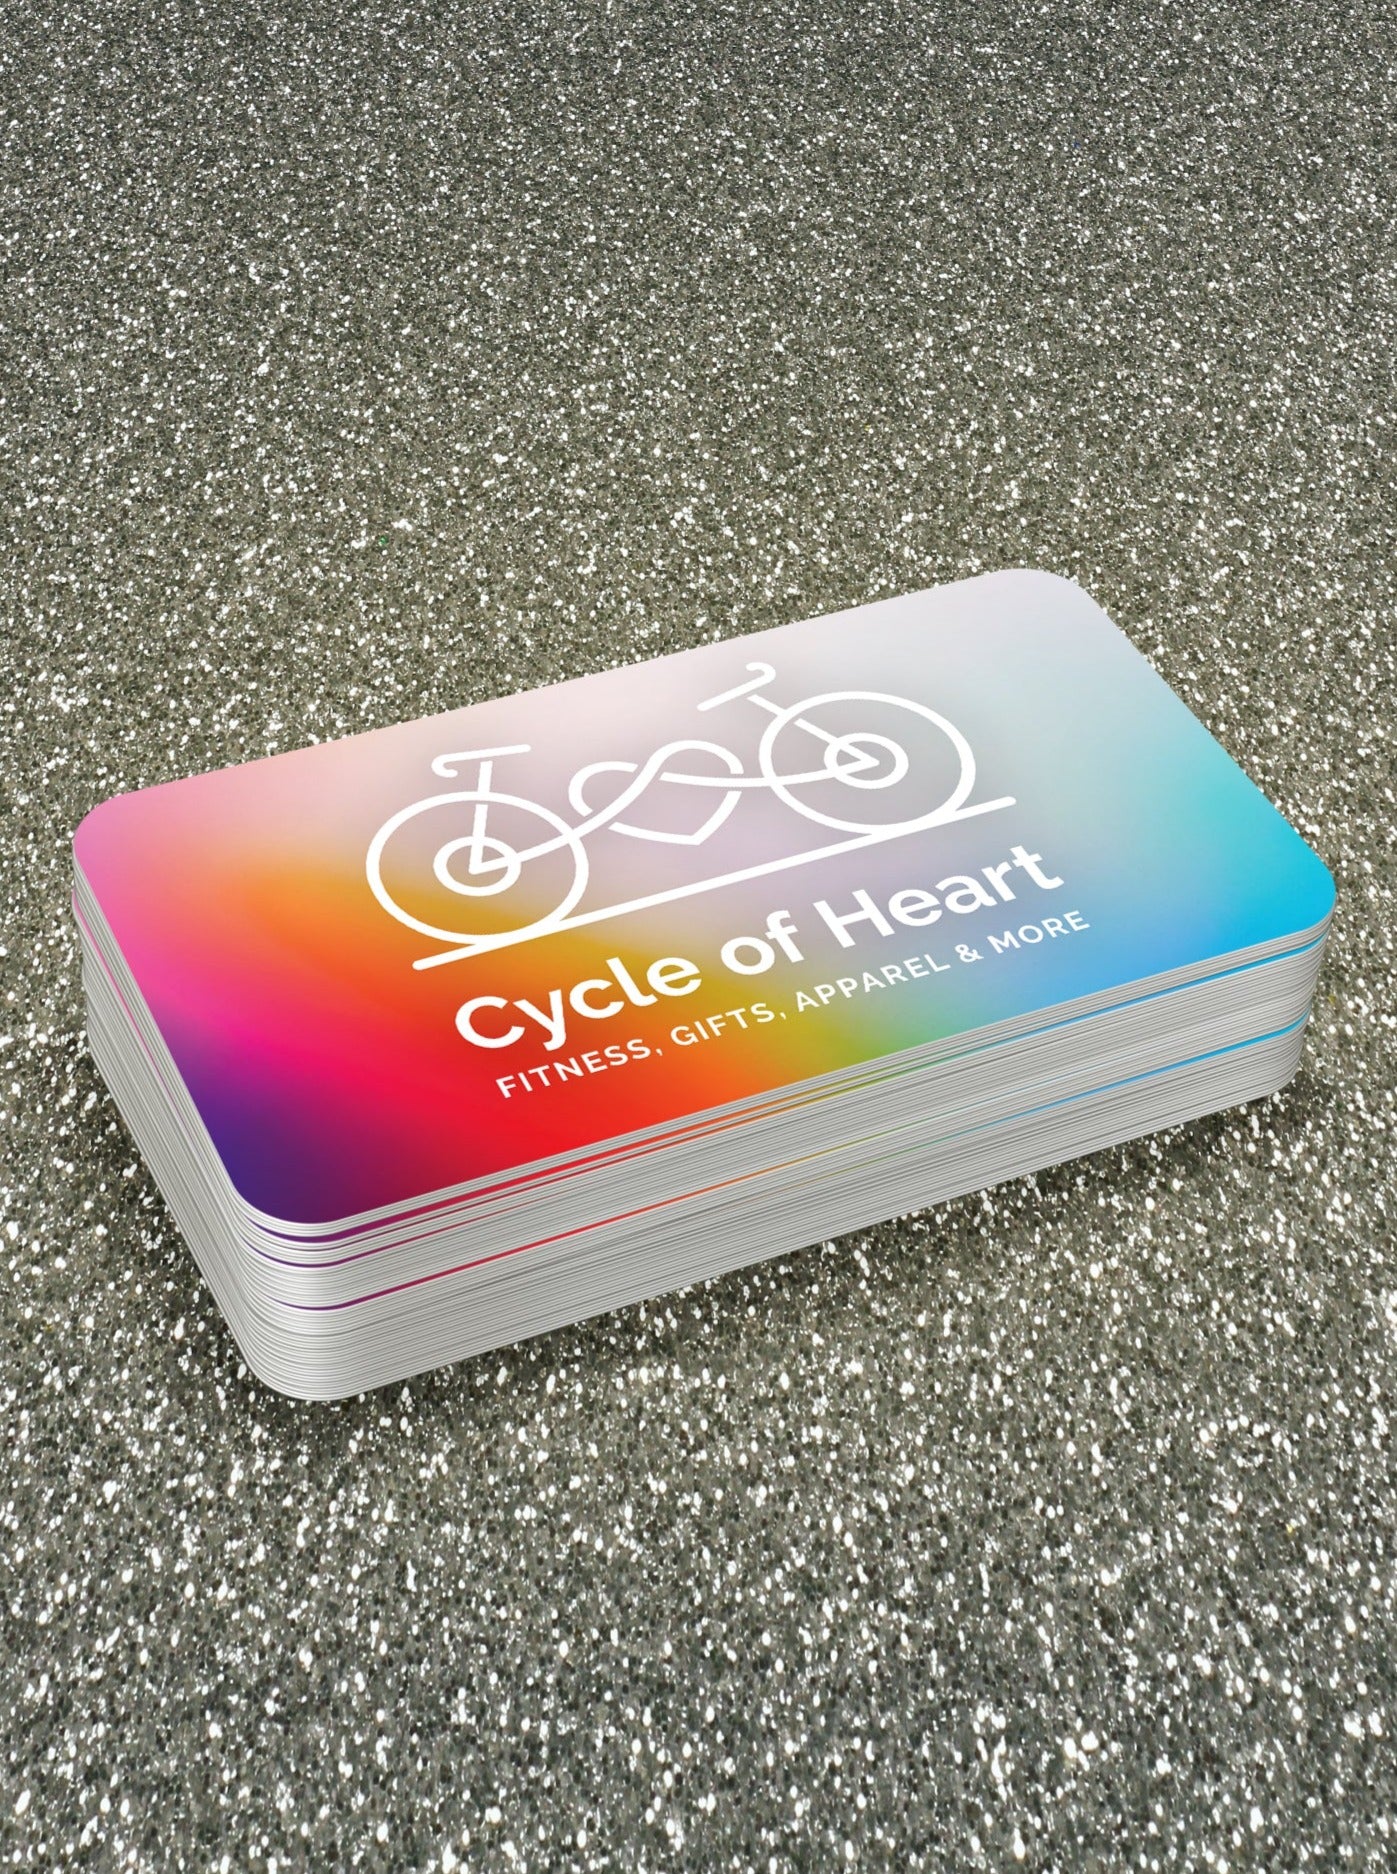 Cycle of Heart Gift Card